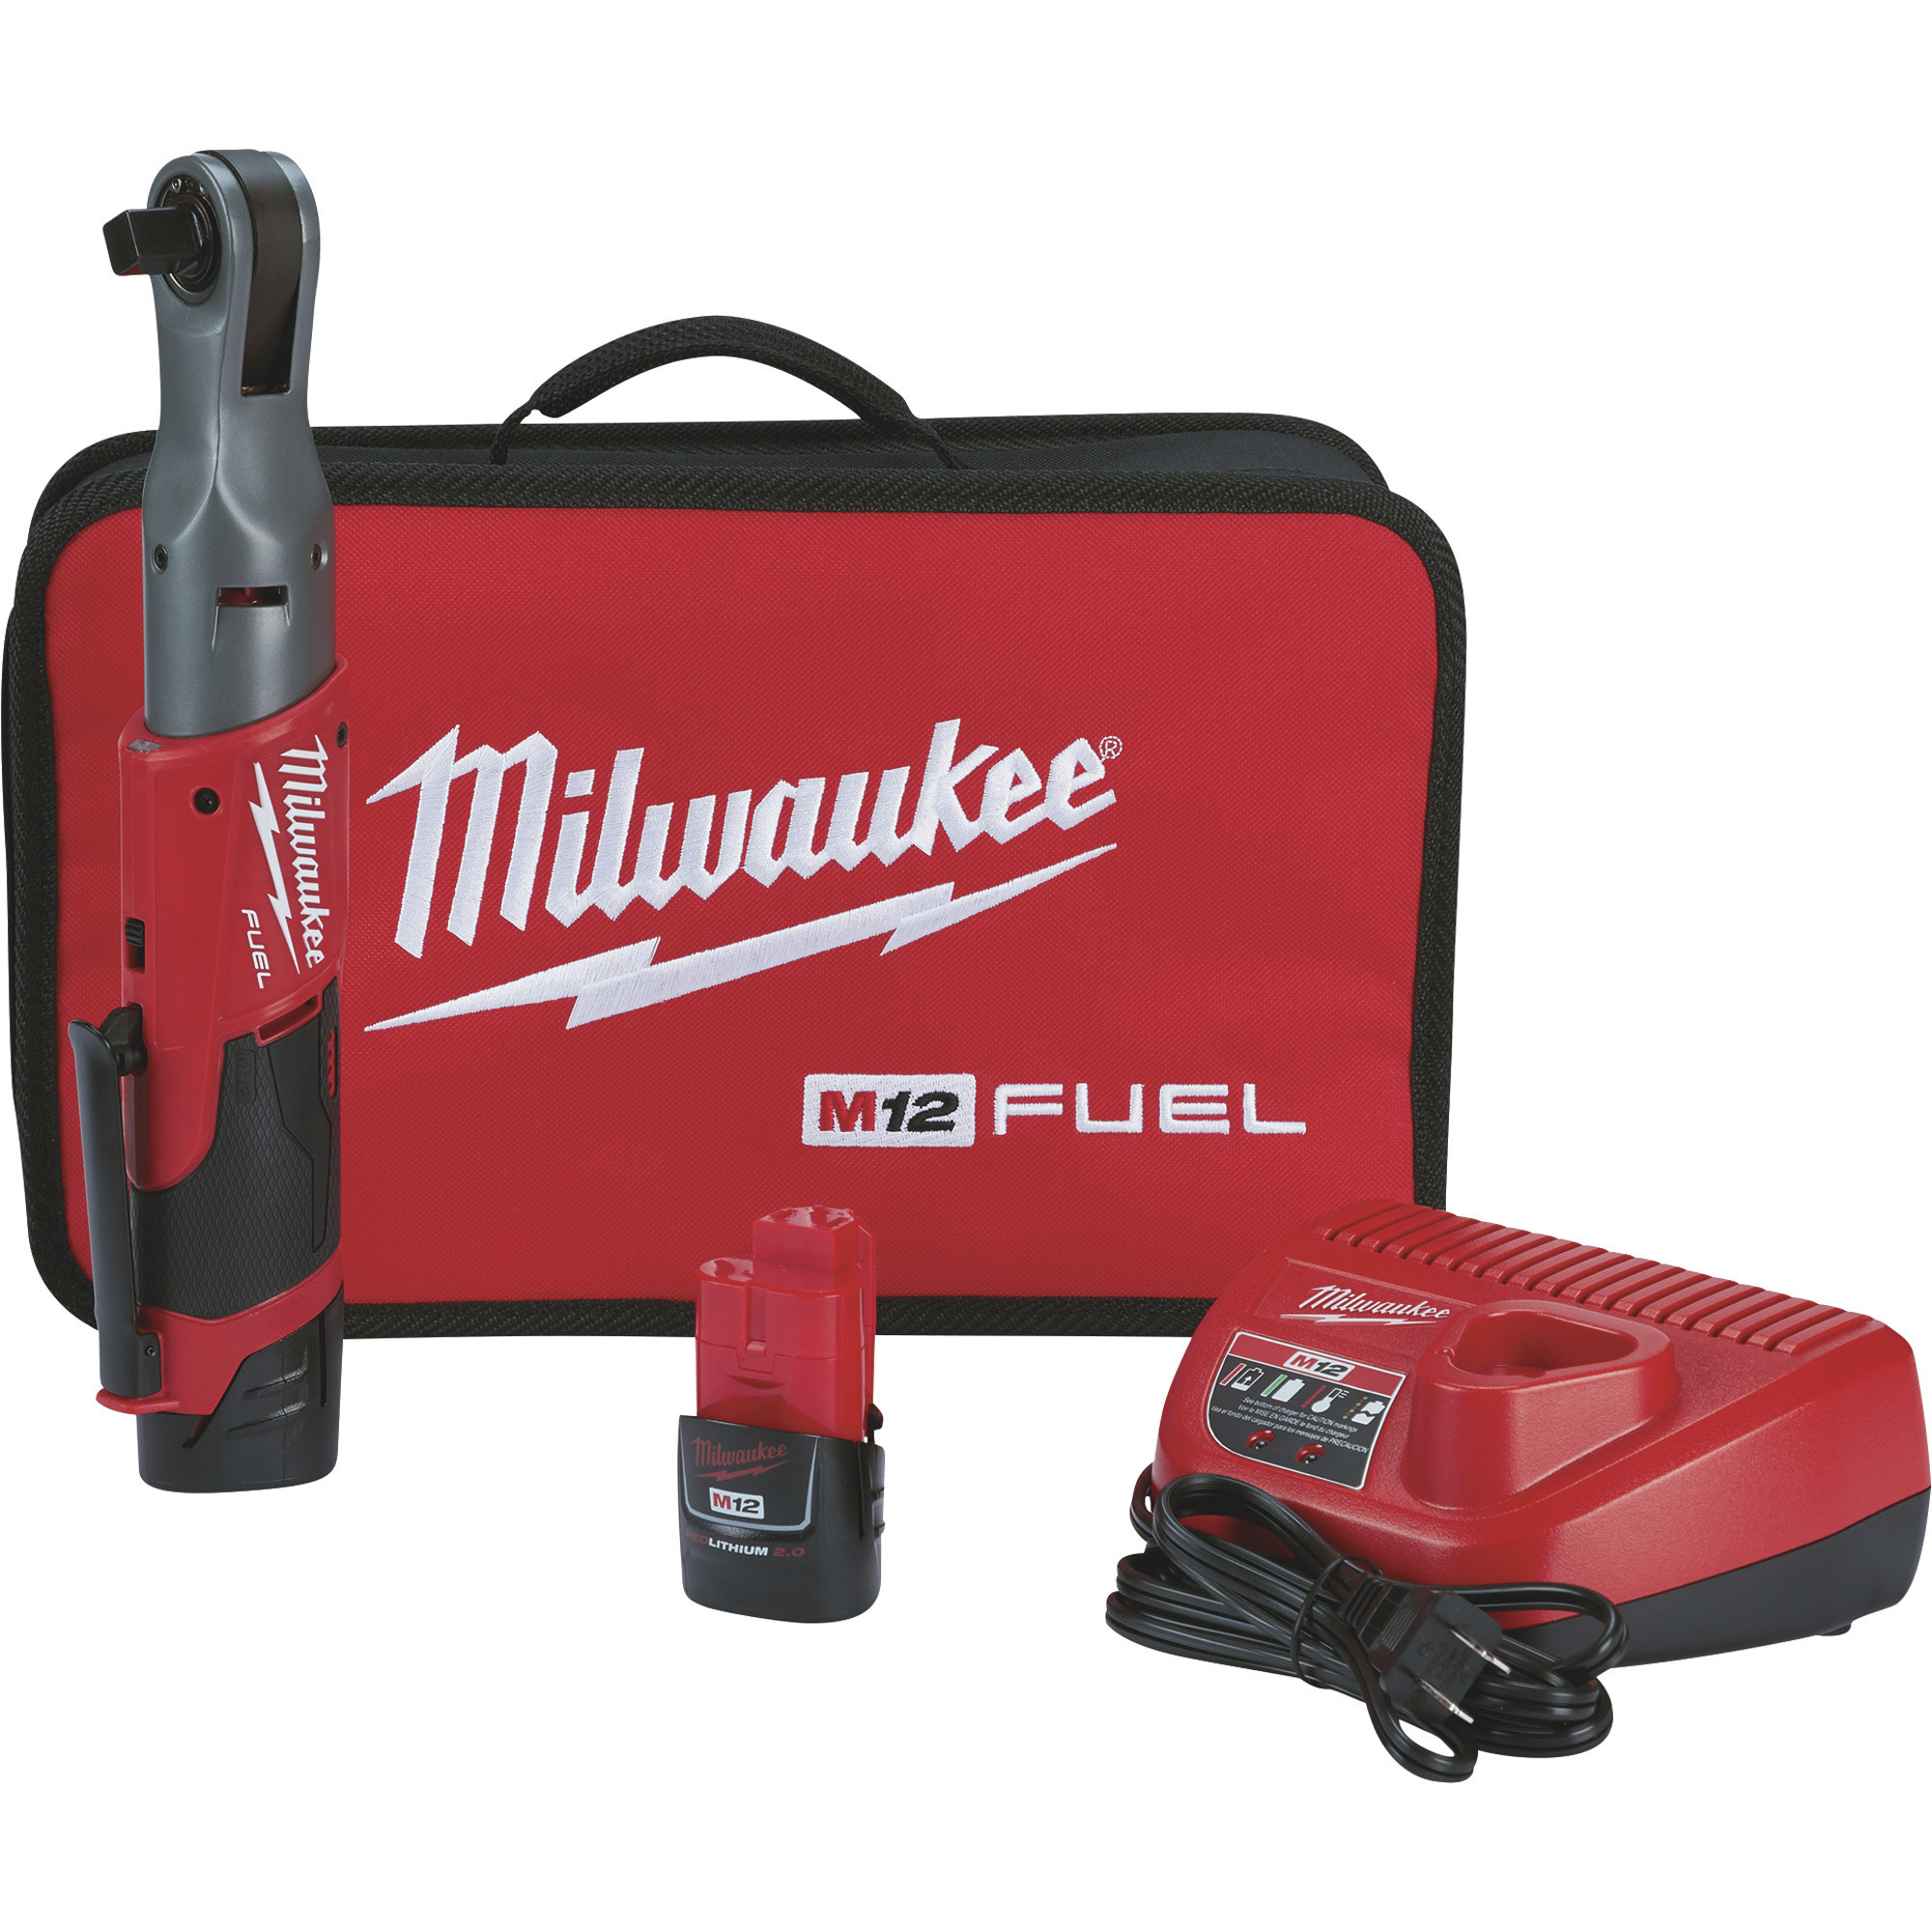 Milwaukee M12 Fuel Cordless 1/2Inch Ratchet Kit, With 2 Batteries, 12 Volt, Model 2558-22